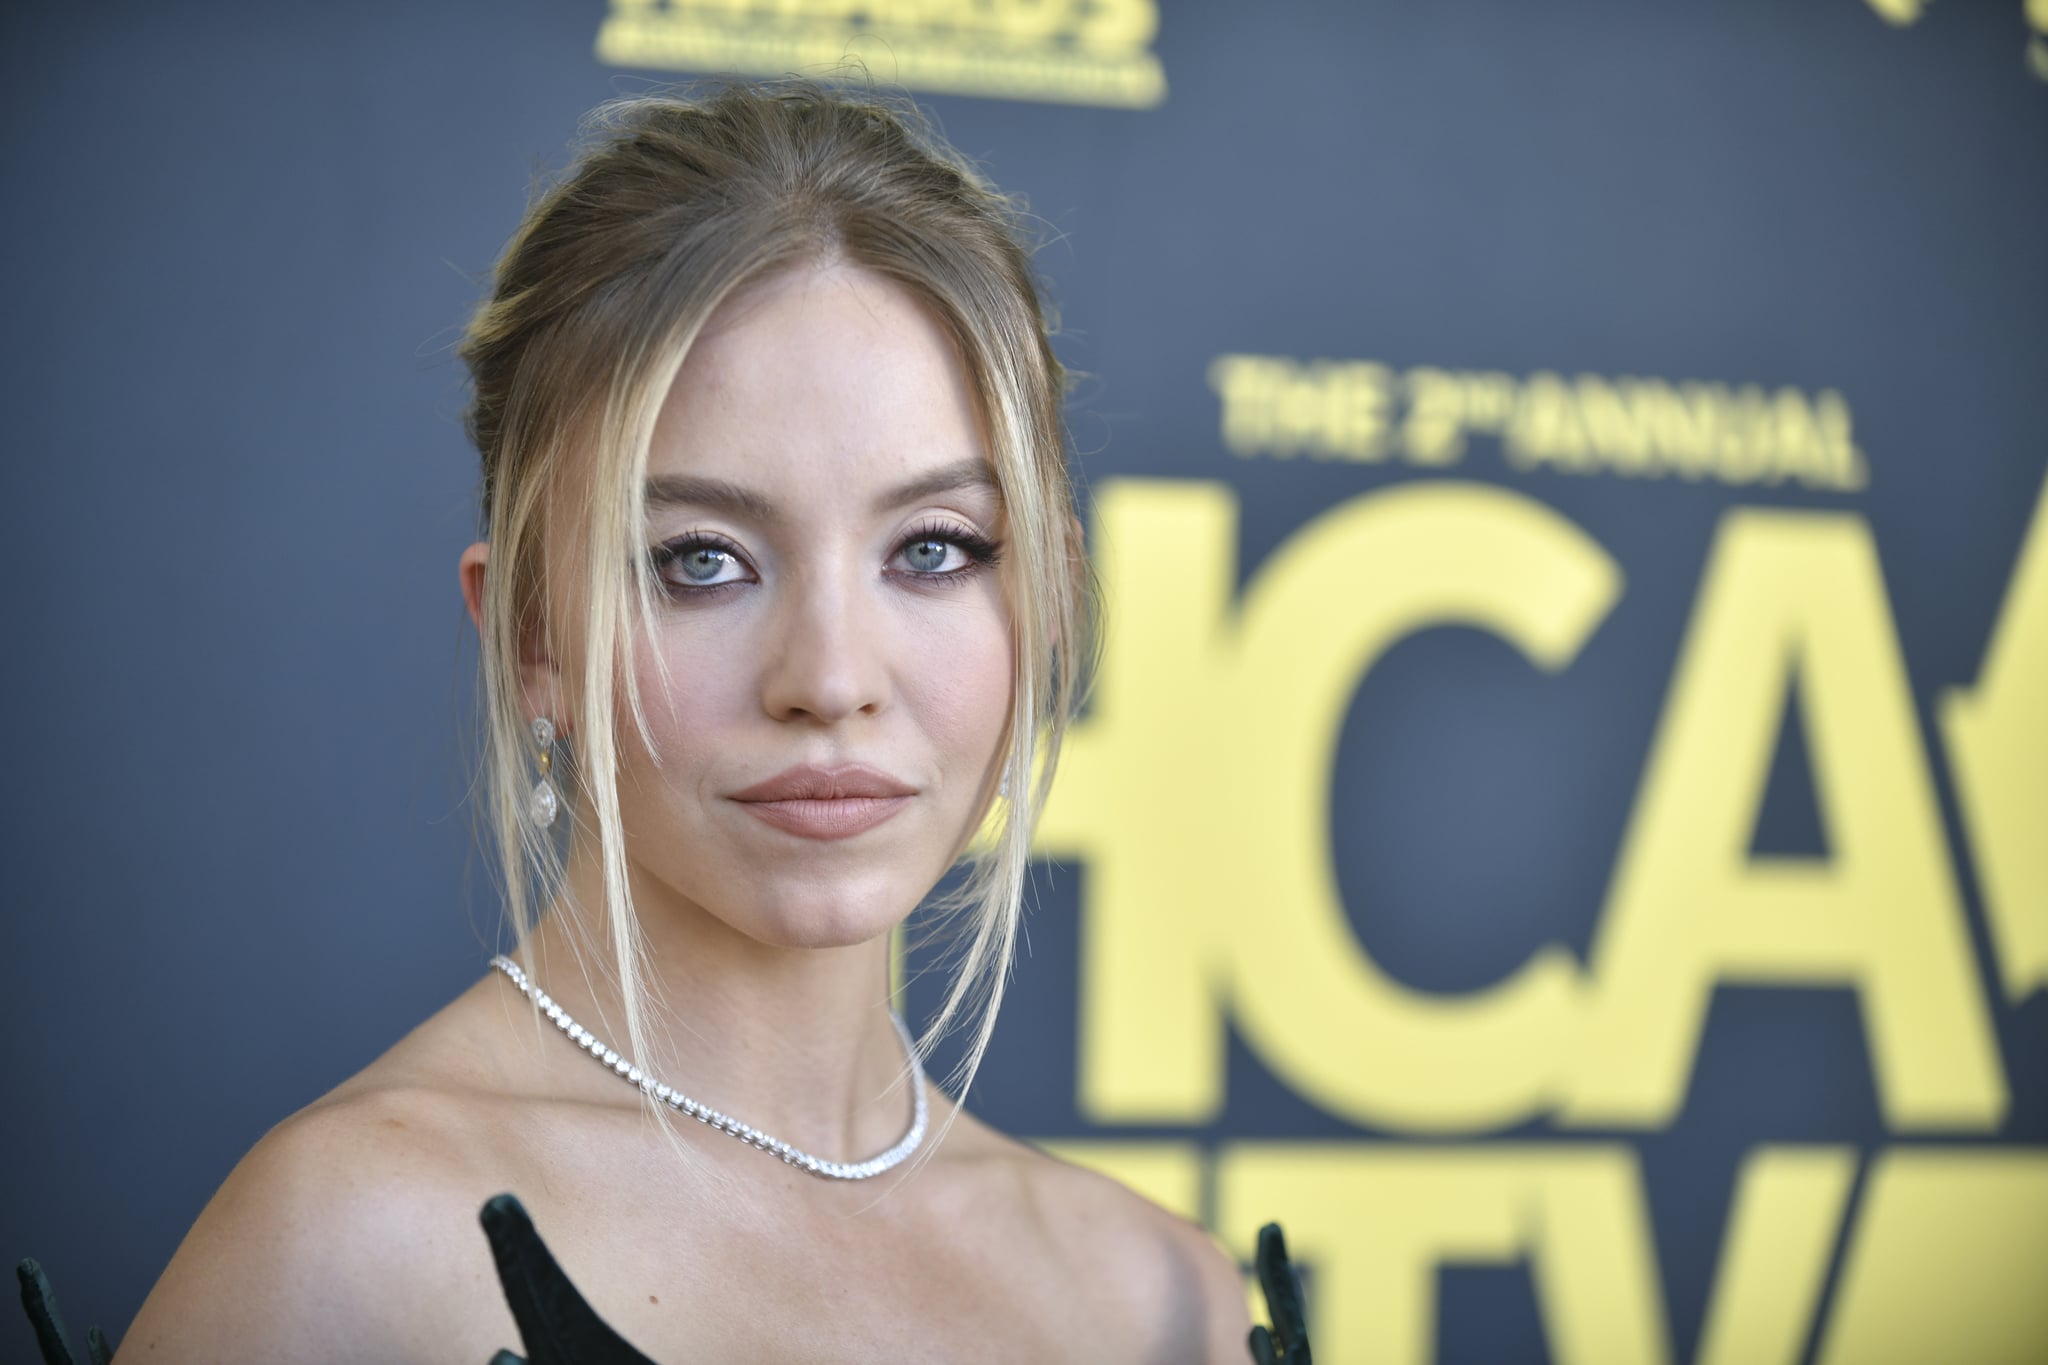 BEVERLY HILLS, CALIFORNIA - AUGUST 13: Sydney Sweeney attends the Red Carpet of the 2nd Annual HCA TV Awards - Broadcast & Cable at The Beverly Hilton on August 13, 2022 in Beverly Hills, California. (Photo by Rodin Eckenroth/WireImage)